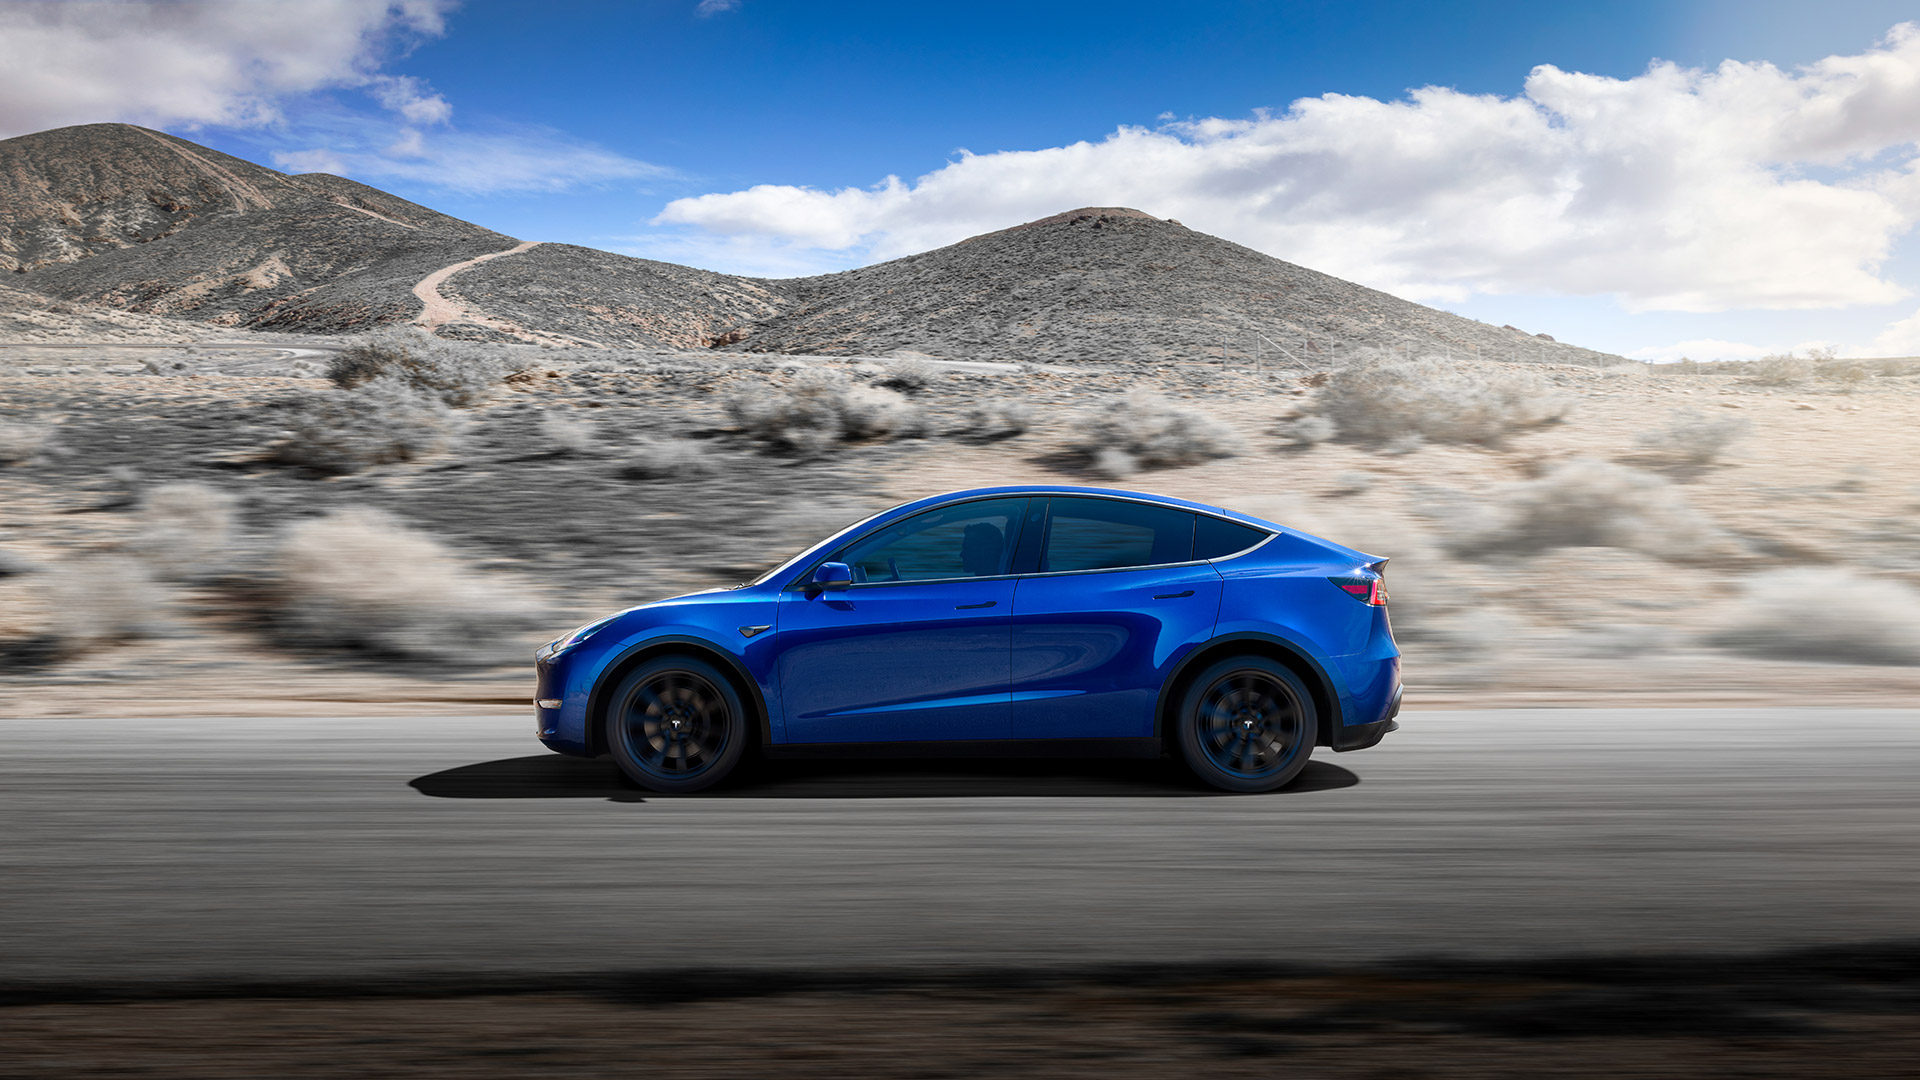 Elon Musk unveils the Tesla Model Y with 230 to 300 miles of range